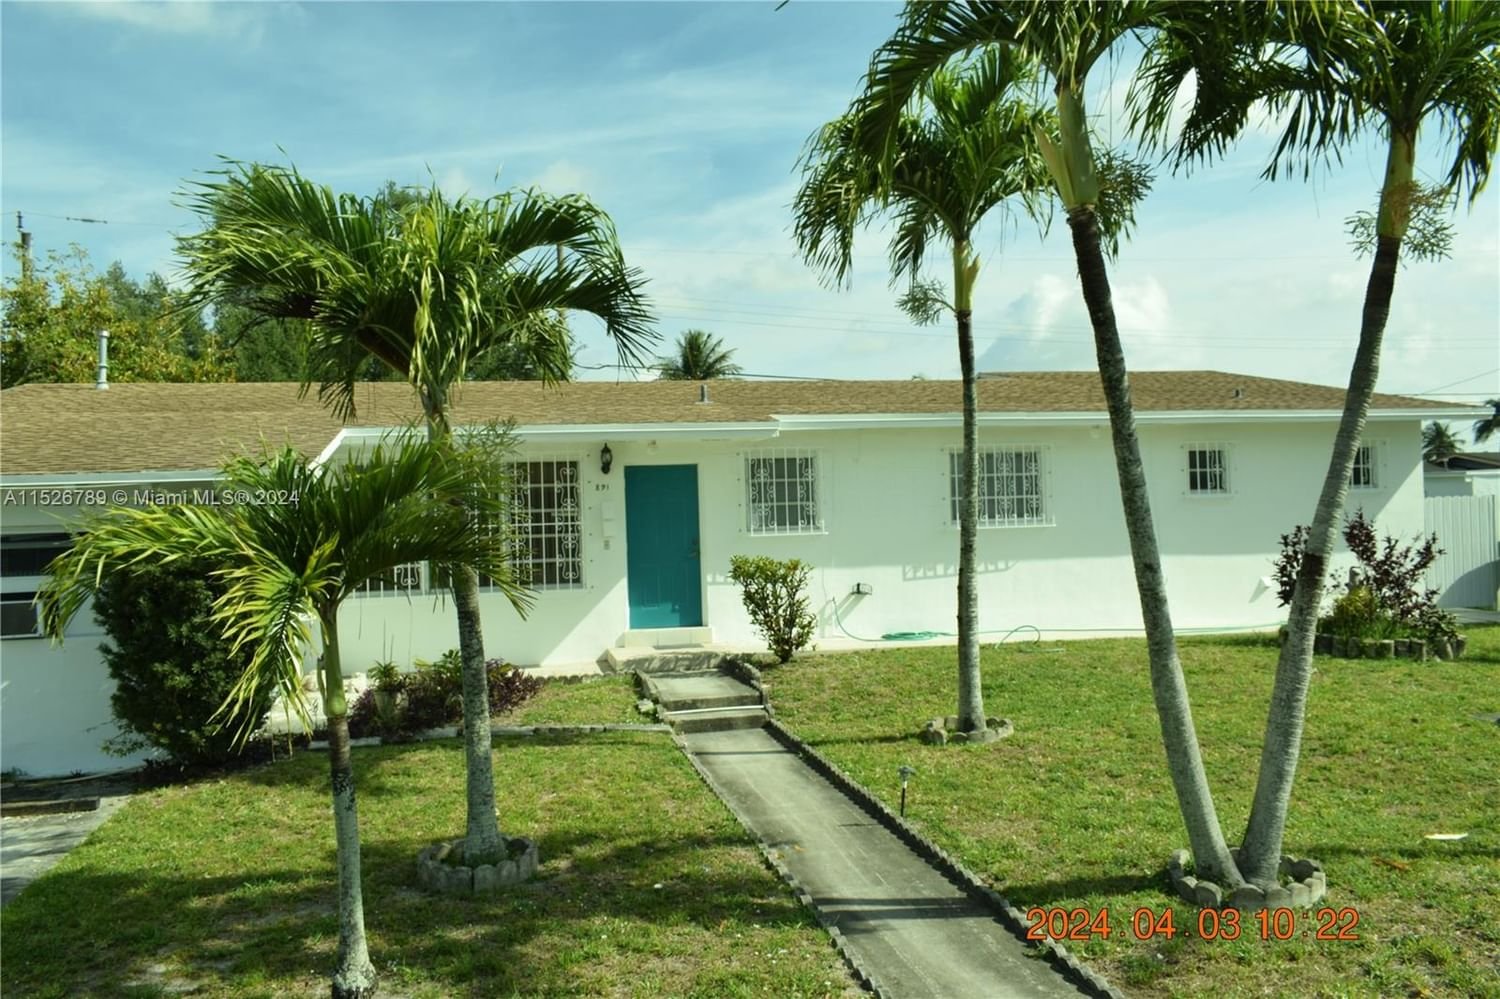 Real estate property located at 891 53rd St, Miami-Dade County, PALM SPRINGS 5TH ADDN SEC, Hialeah, FL